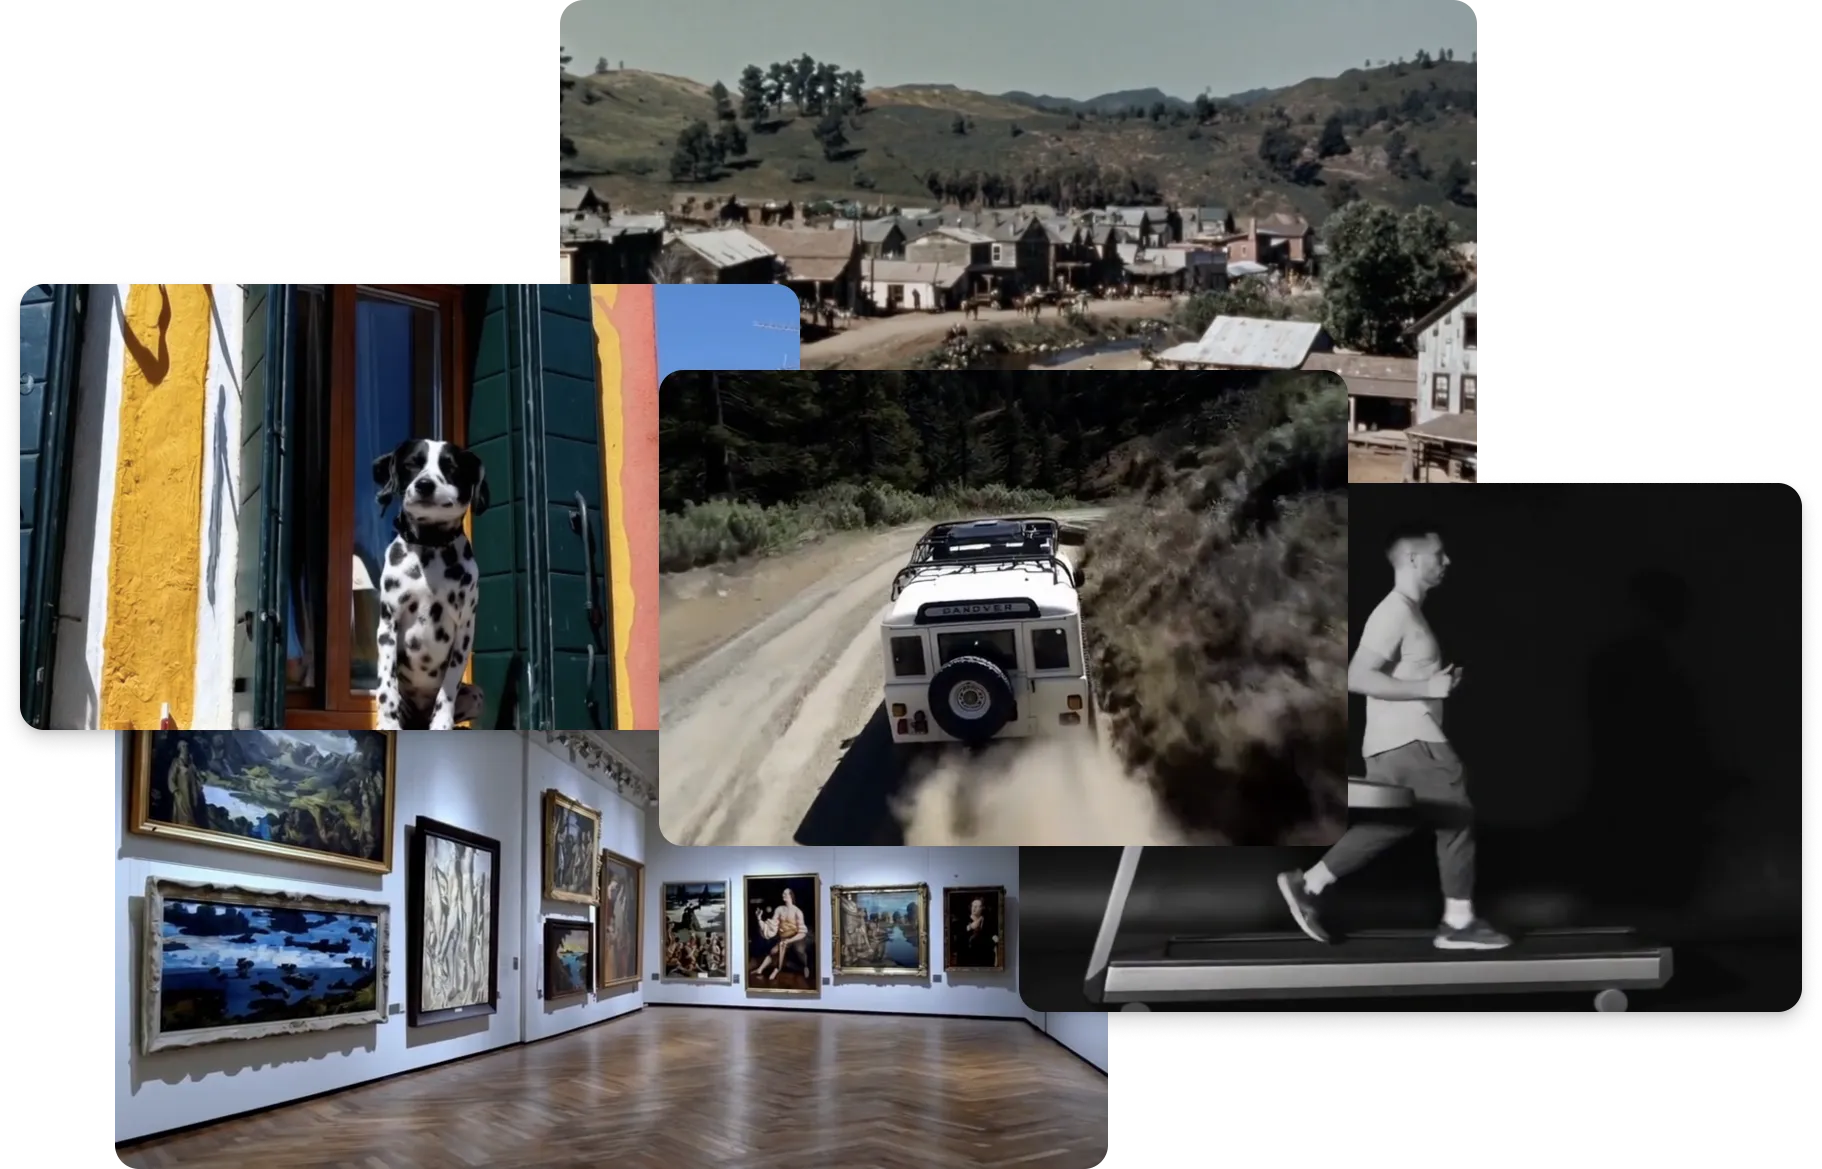 A collage of six images arranged in a staggered layout against a light background. The images depict a variety of scenes including a dog looking out of a window, a vintage photo of a hilly village, colorful building facades, a Land Rover on a dusty road, a person running on a treadmill in monochrome, and a gallery interior with framed paintings.